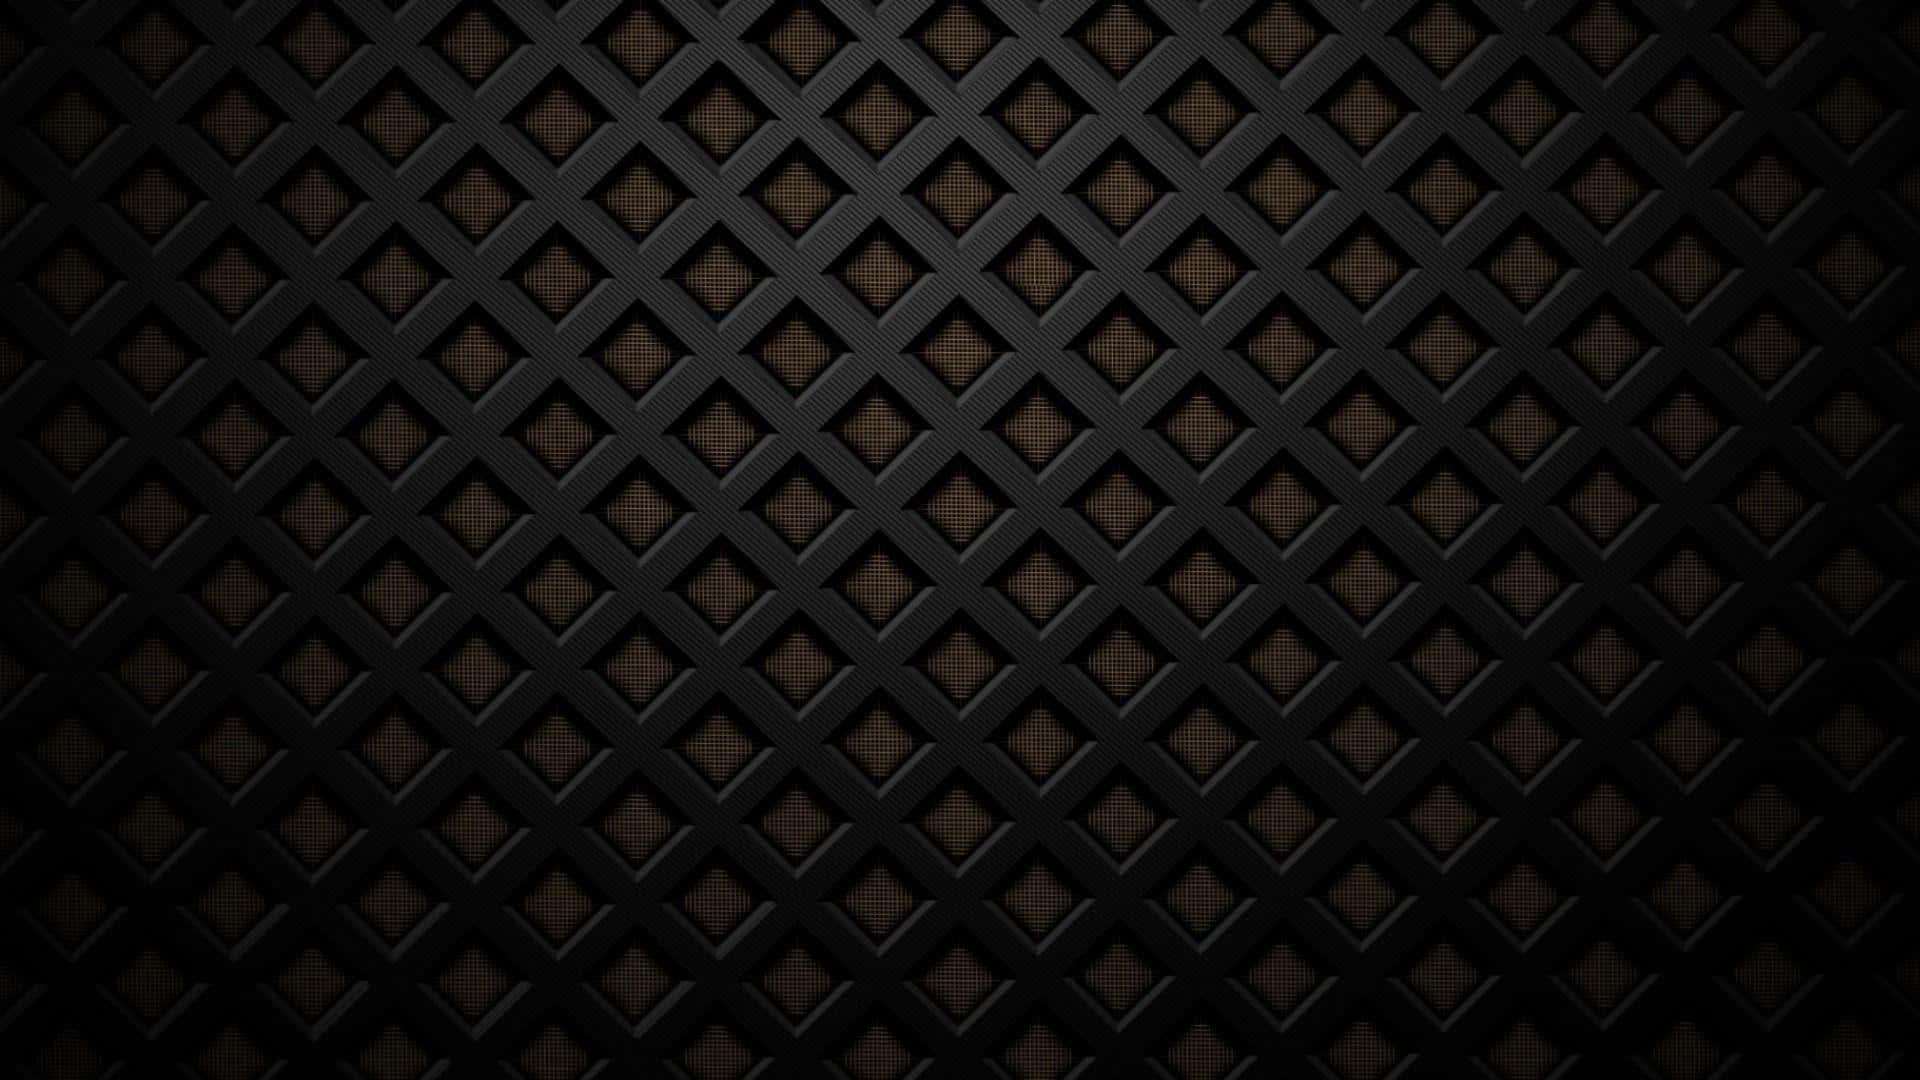 A Black Metal Background With Diamonds